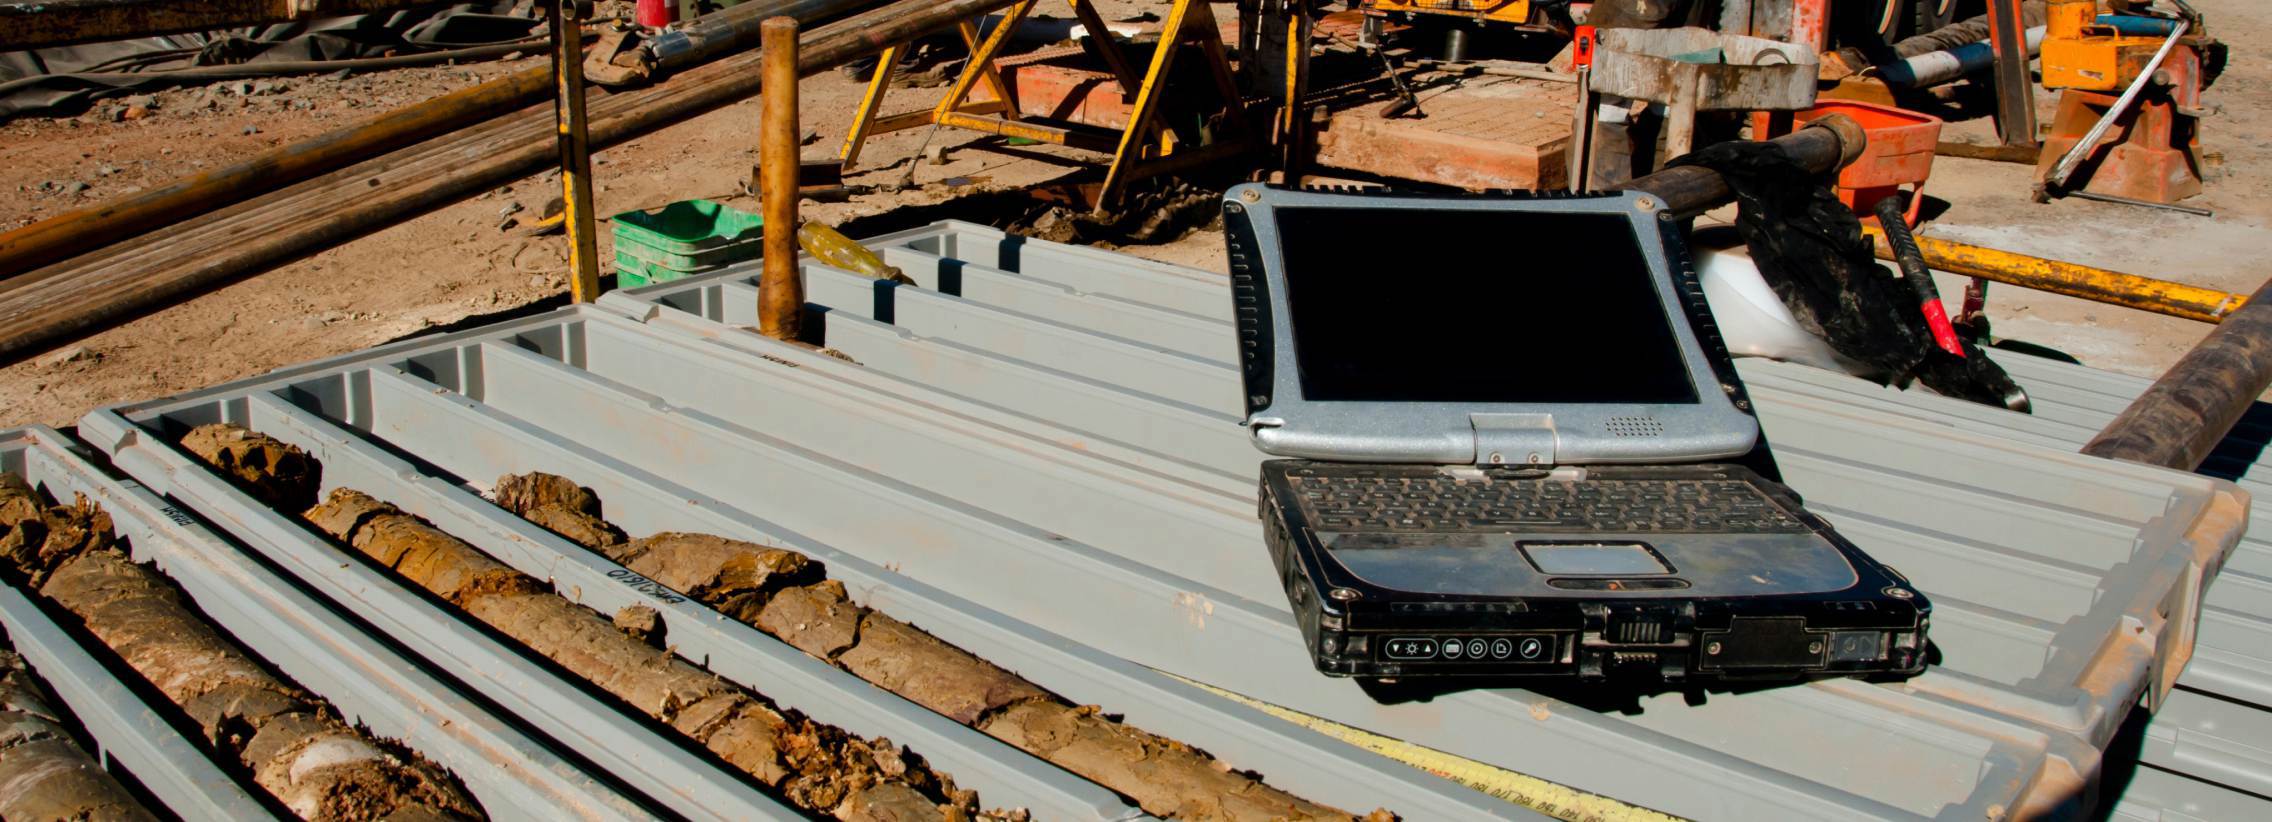 Laptop in a protective case at a mining site